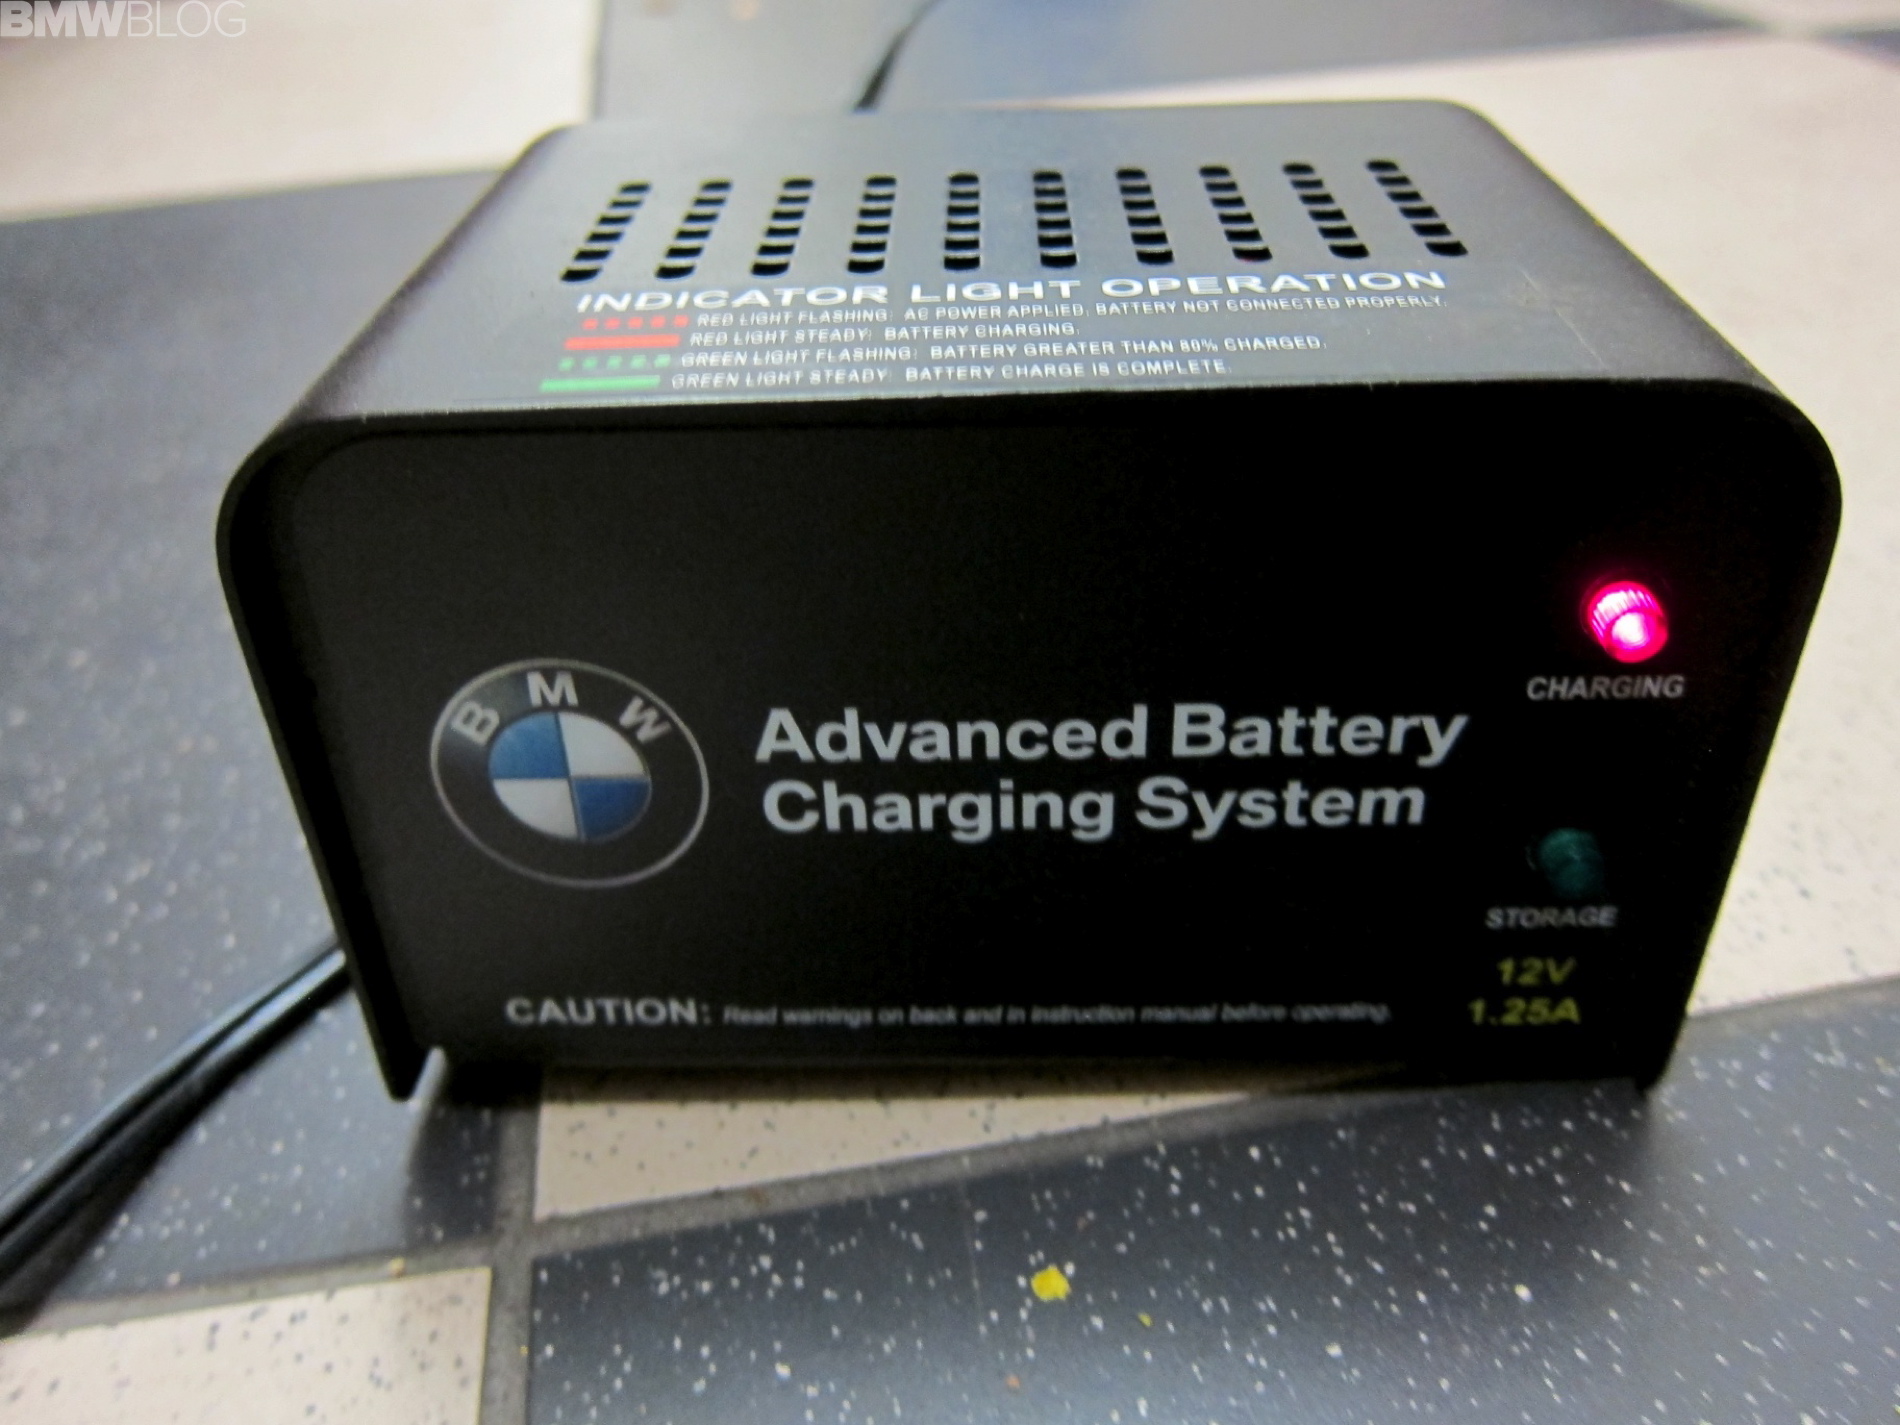 Bmw advanced battery charging system for motorcycles